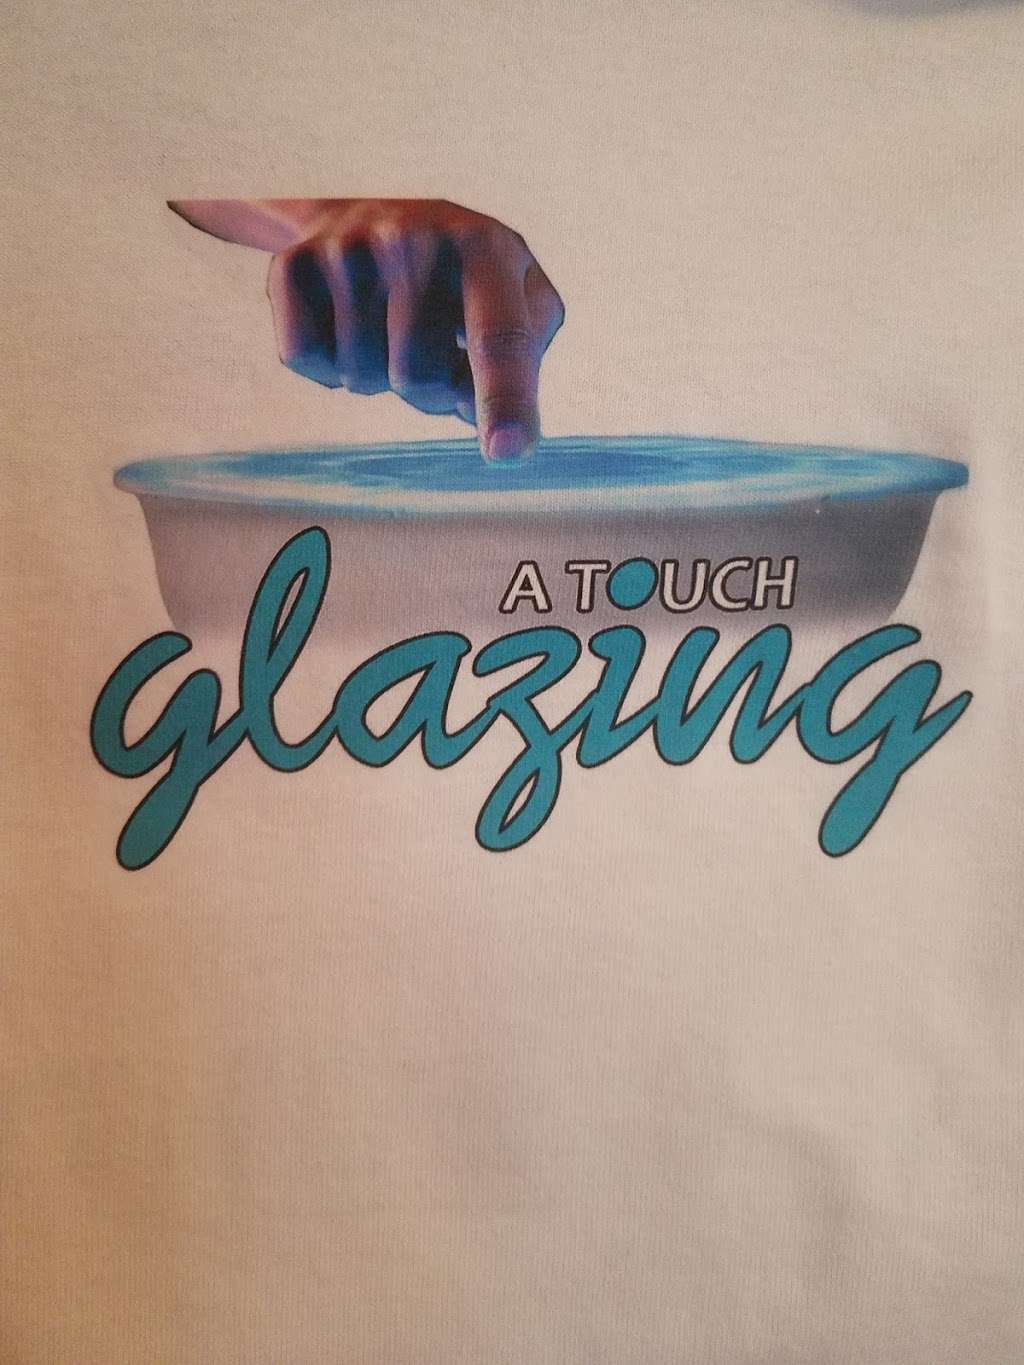 A touch glazing Inc | 2208 N Merrimac Ave, Chicago, IL 60639 | Phone: (312) 877-9441